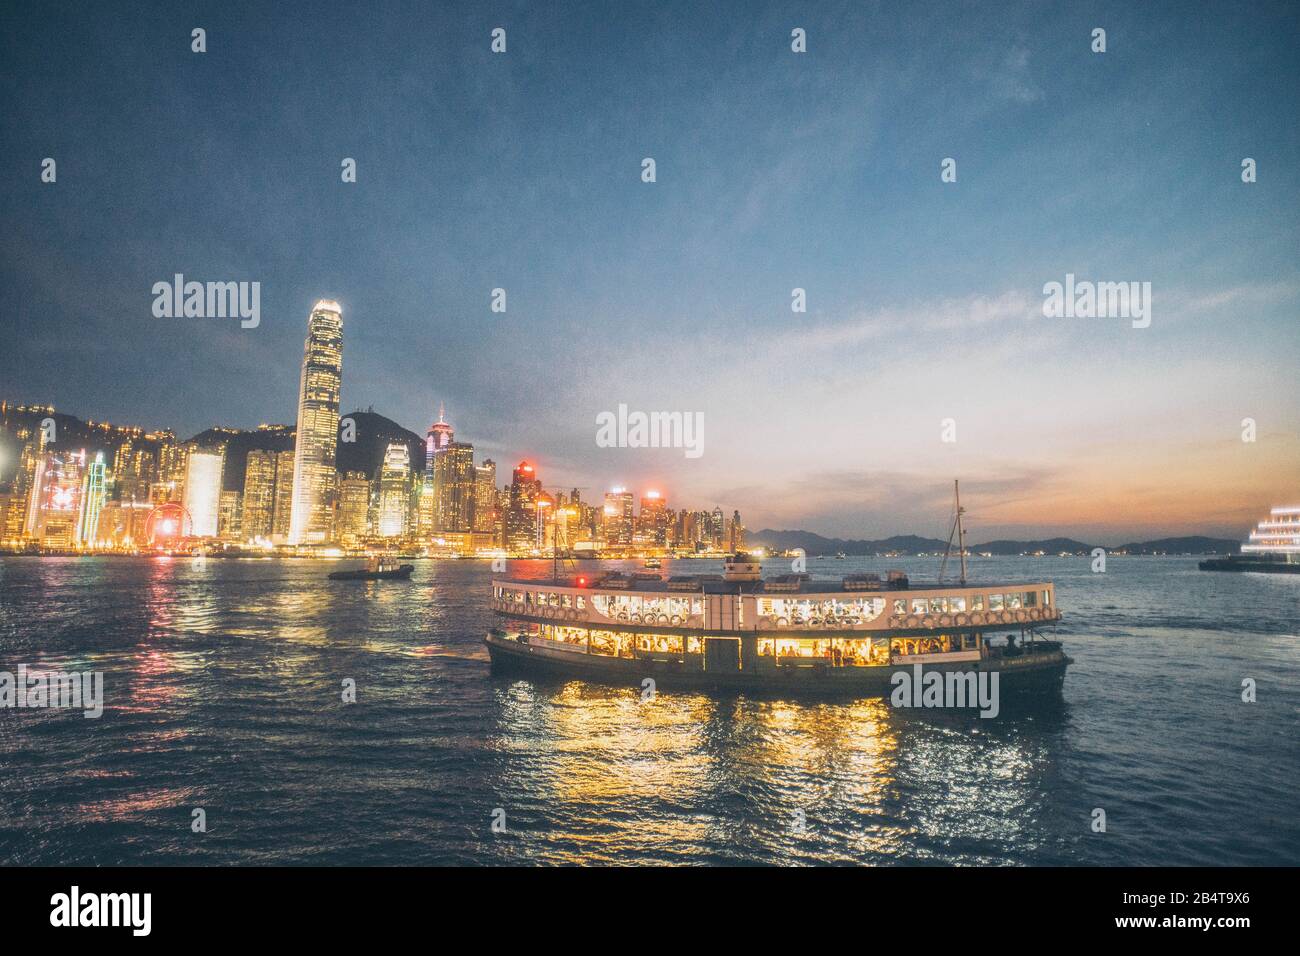 Star ferry cruising in Victoria harbour of Hong Kong. Stock Photo